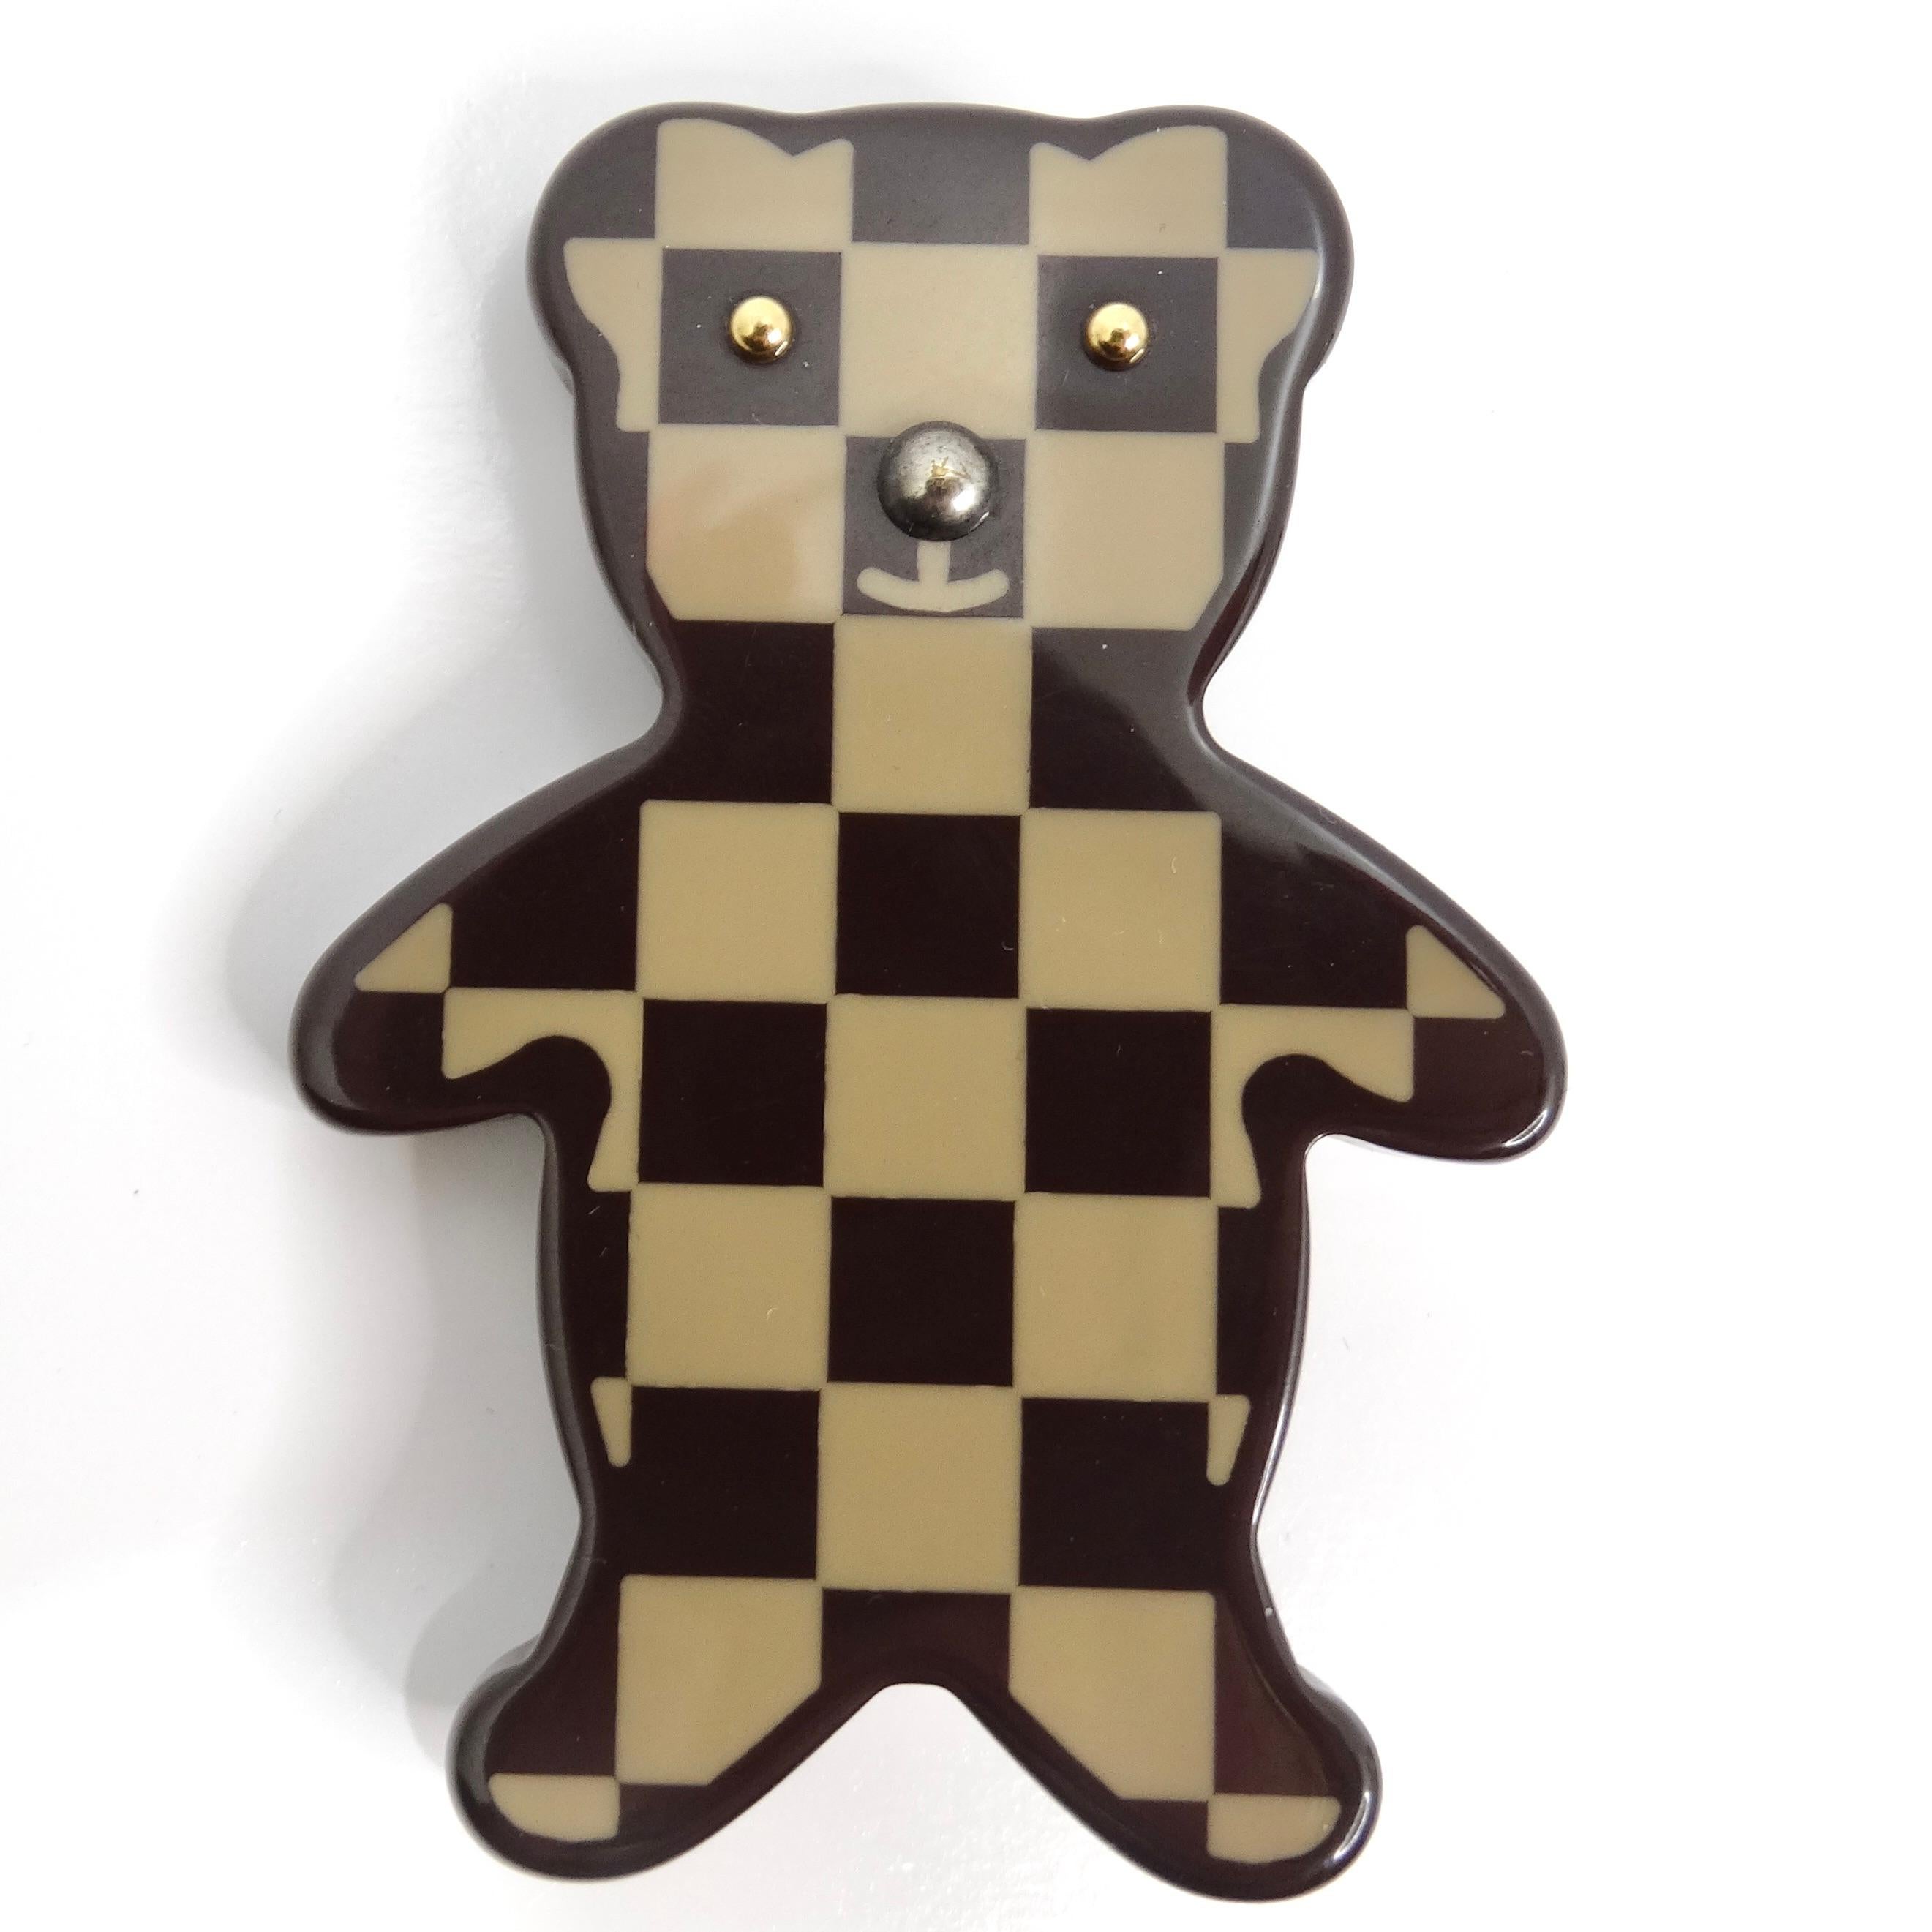 Introducing the exquisite Louis Vuitton Damier Ebene Resin Teddy Bear Brooch, a playful and luxurious accessory that adds a touch of sophistication to any ensemble. Crafted from high-quality resin, this adorable brooch is designed in the shape of a